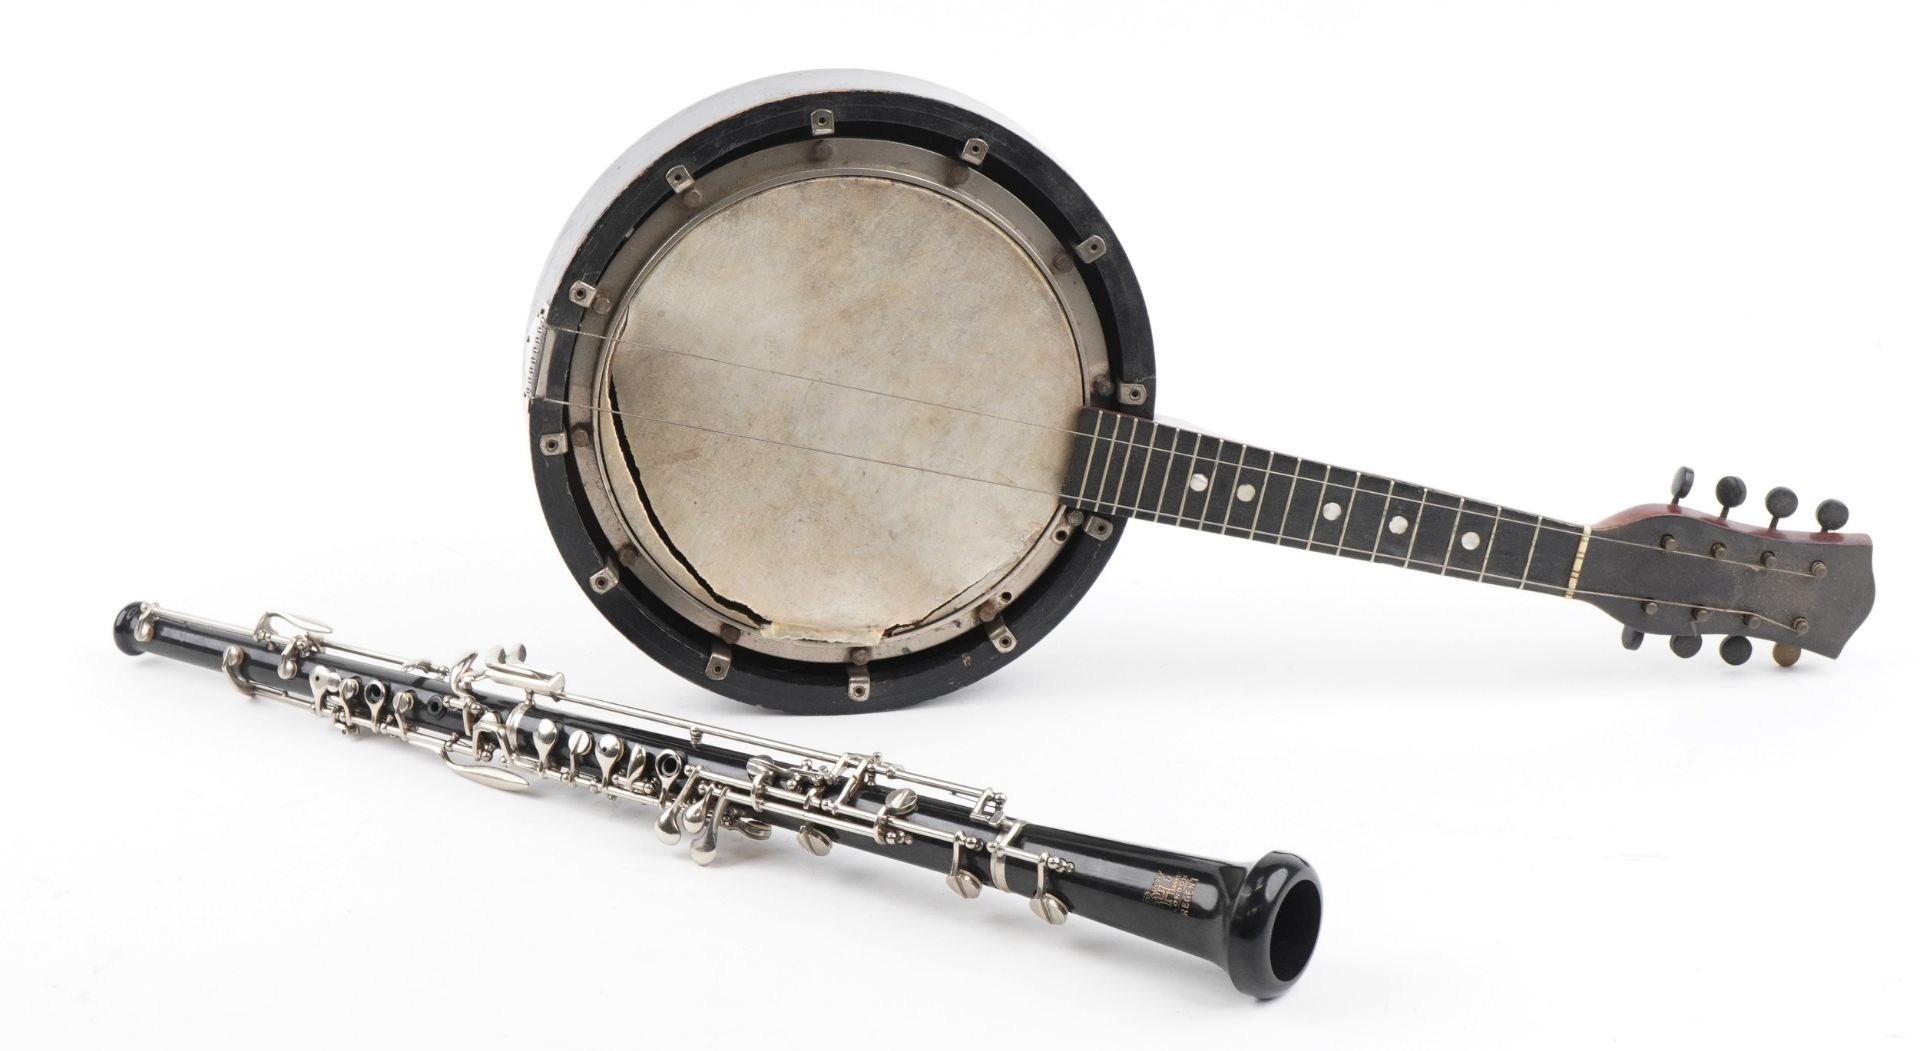 Reliance eight string banjolele and a Boosey & Hawkes three piece clarinet, both with cases, the